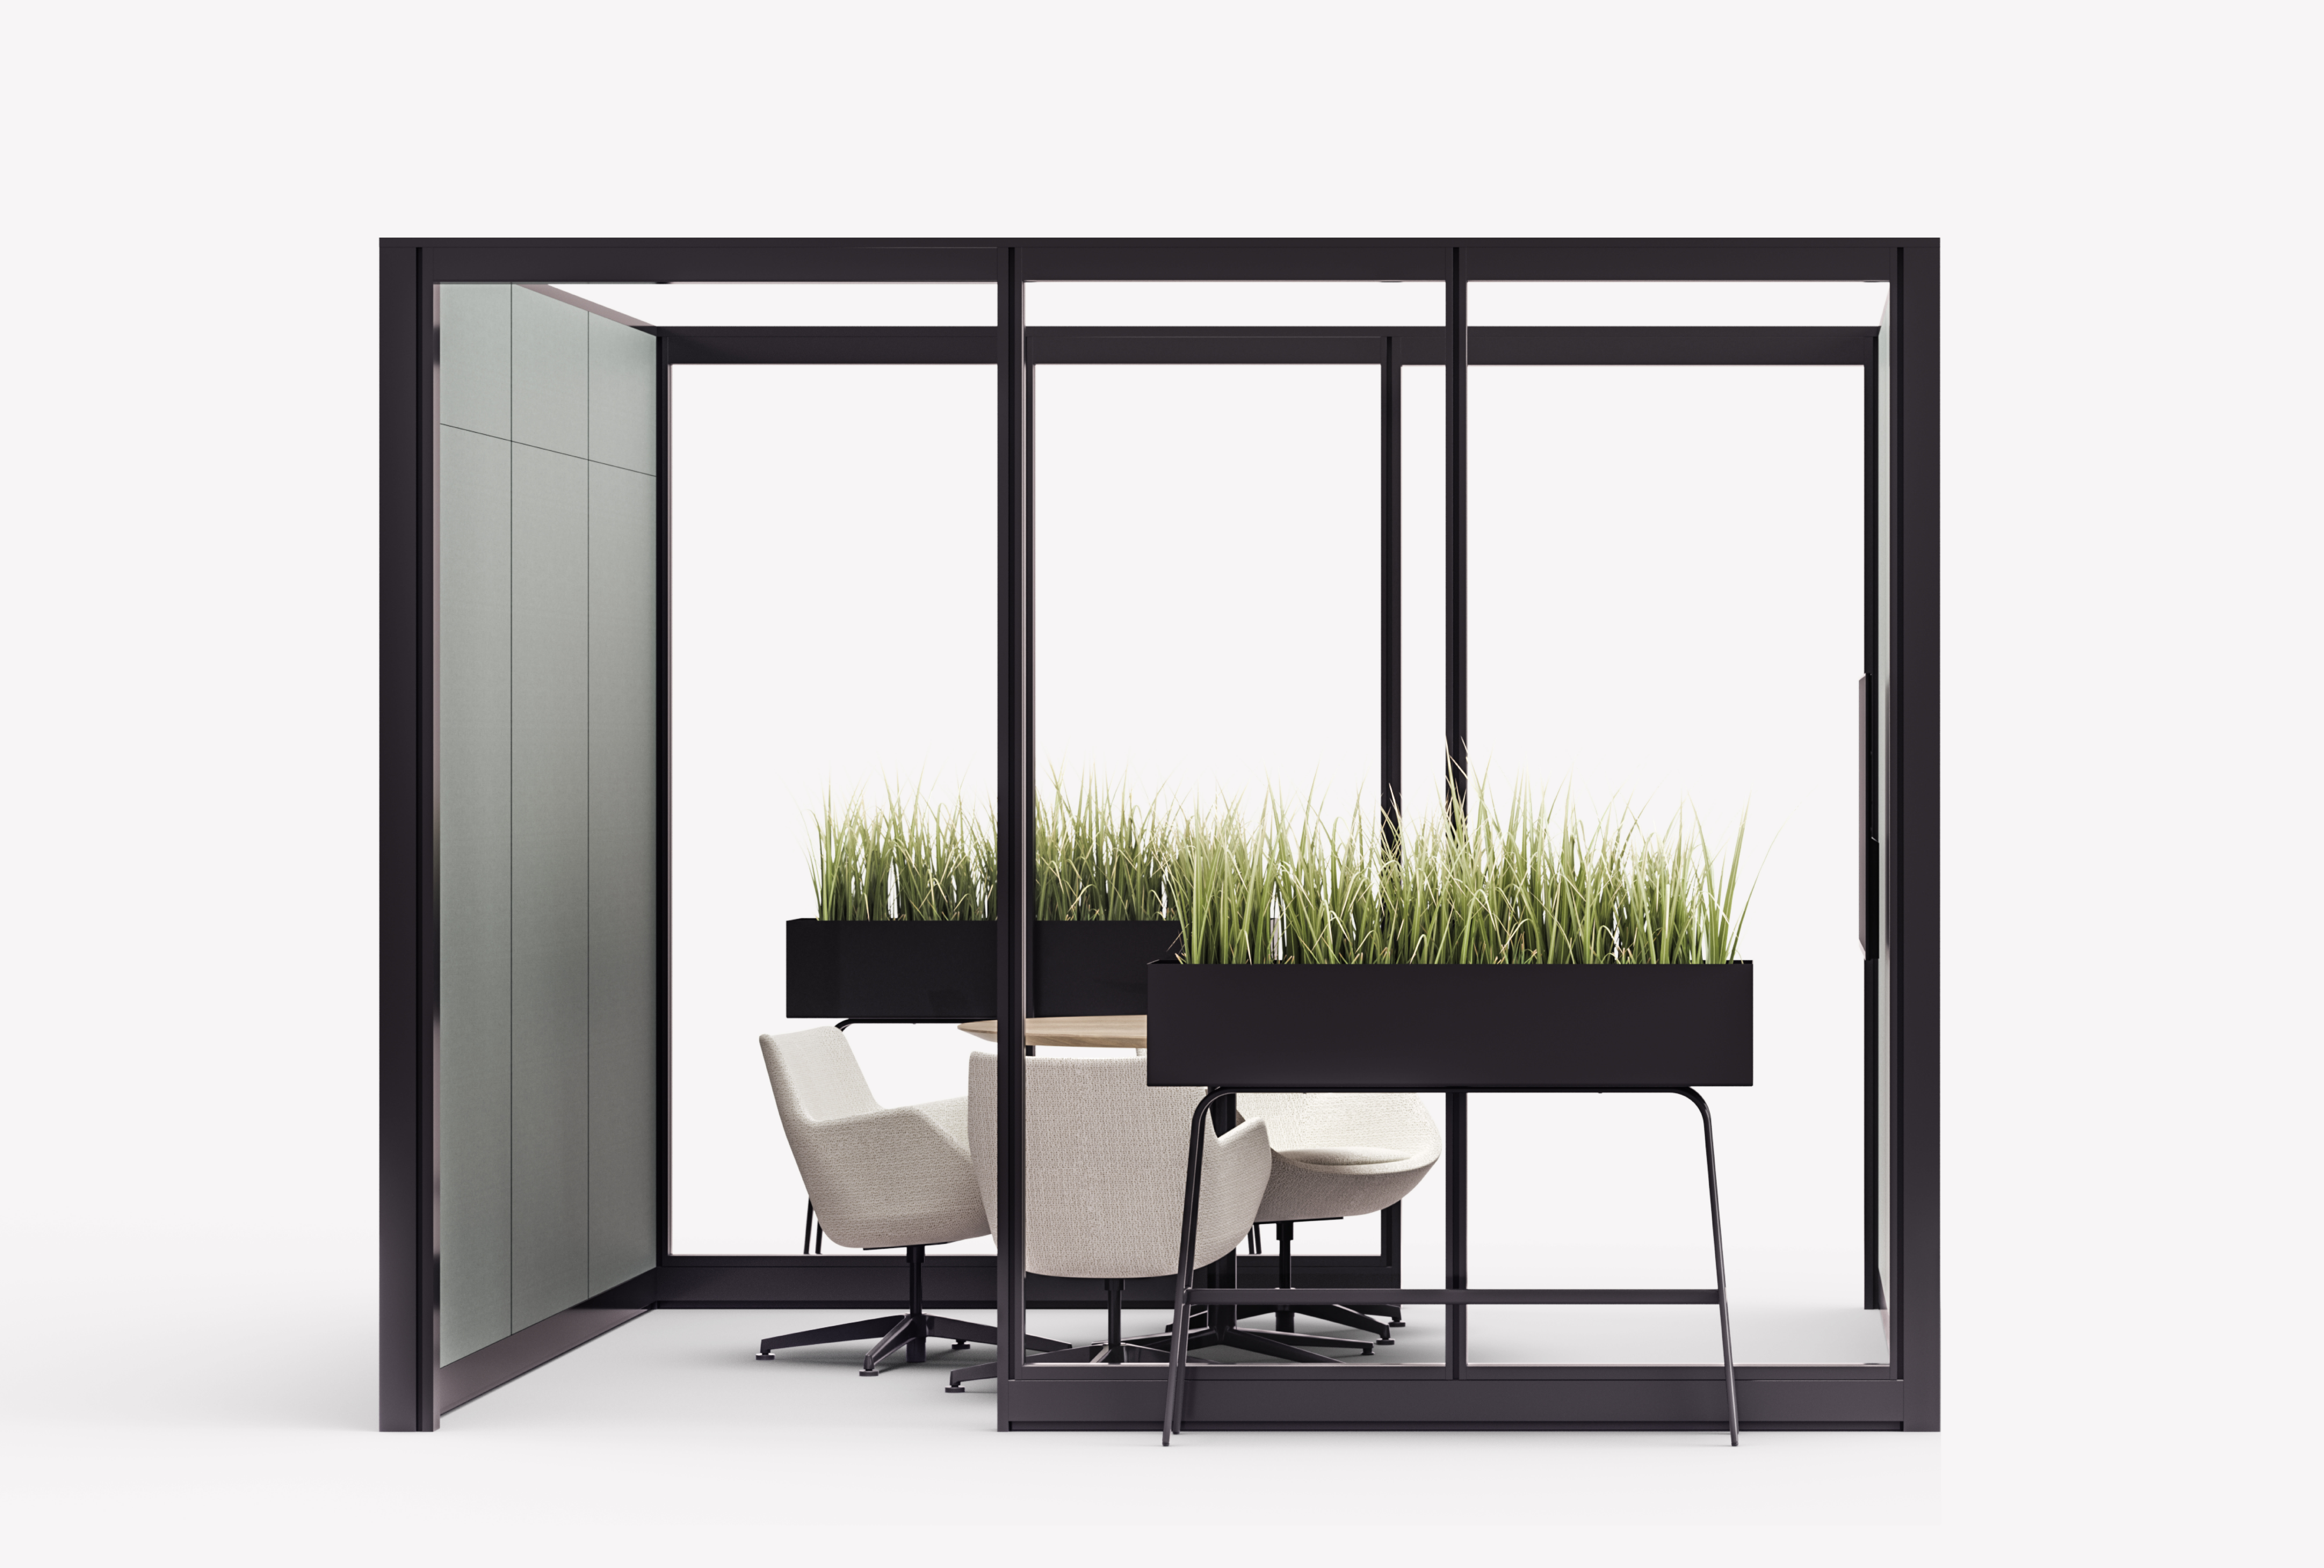 Beyond Meeting Pavilion with black frame and sound absorbing walls, three lounge conference chairs, a table and two park planters.